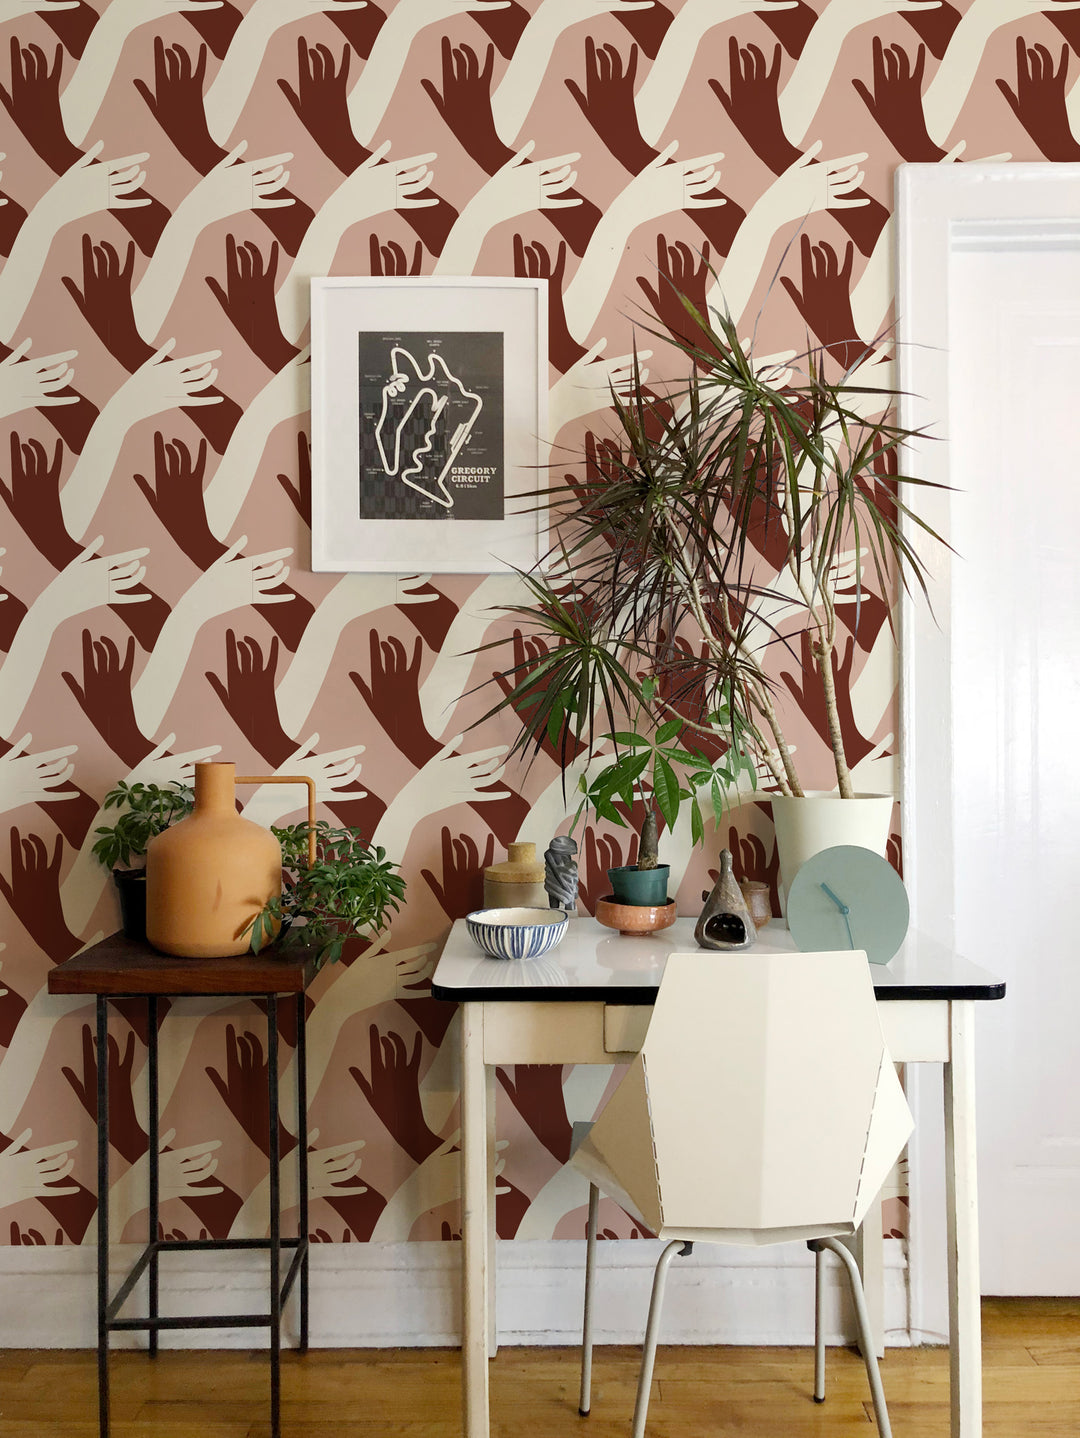 Connect - Cherrywood Wallpaper by Natalie Papier